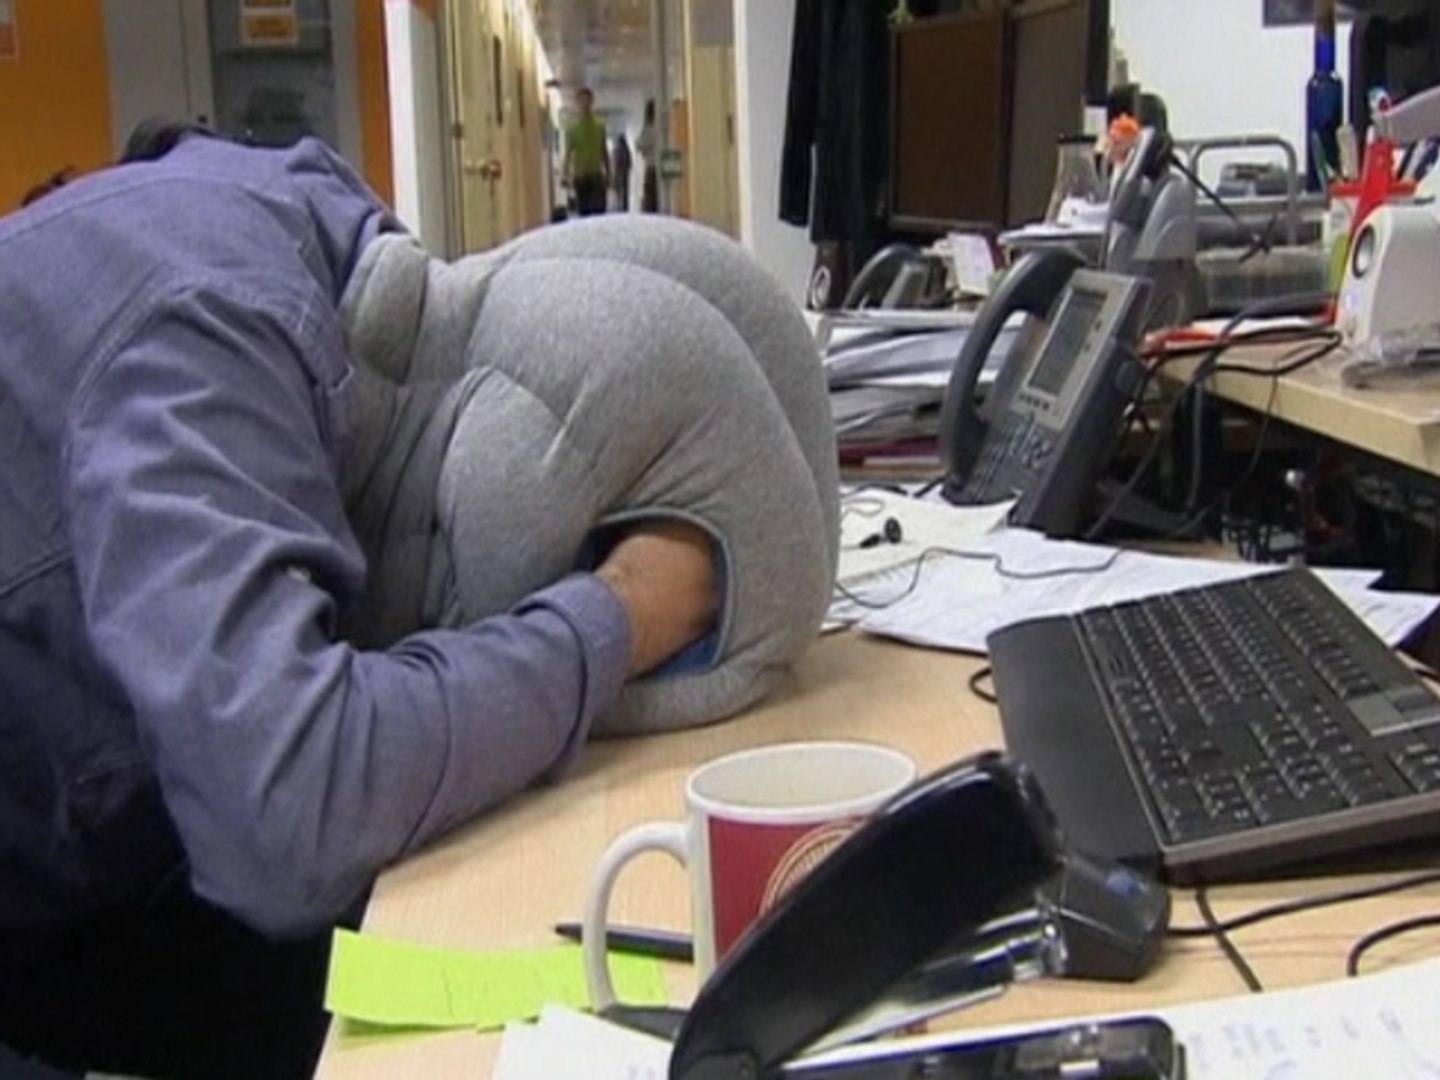 Ostrich Pillow Puts New Spin On The Power Nap